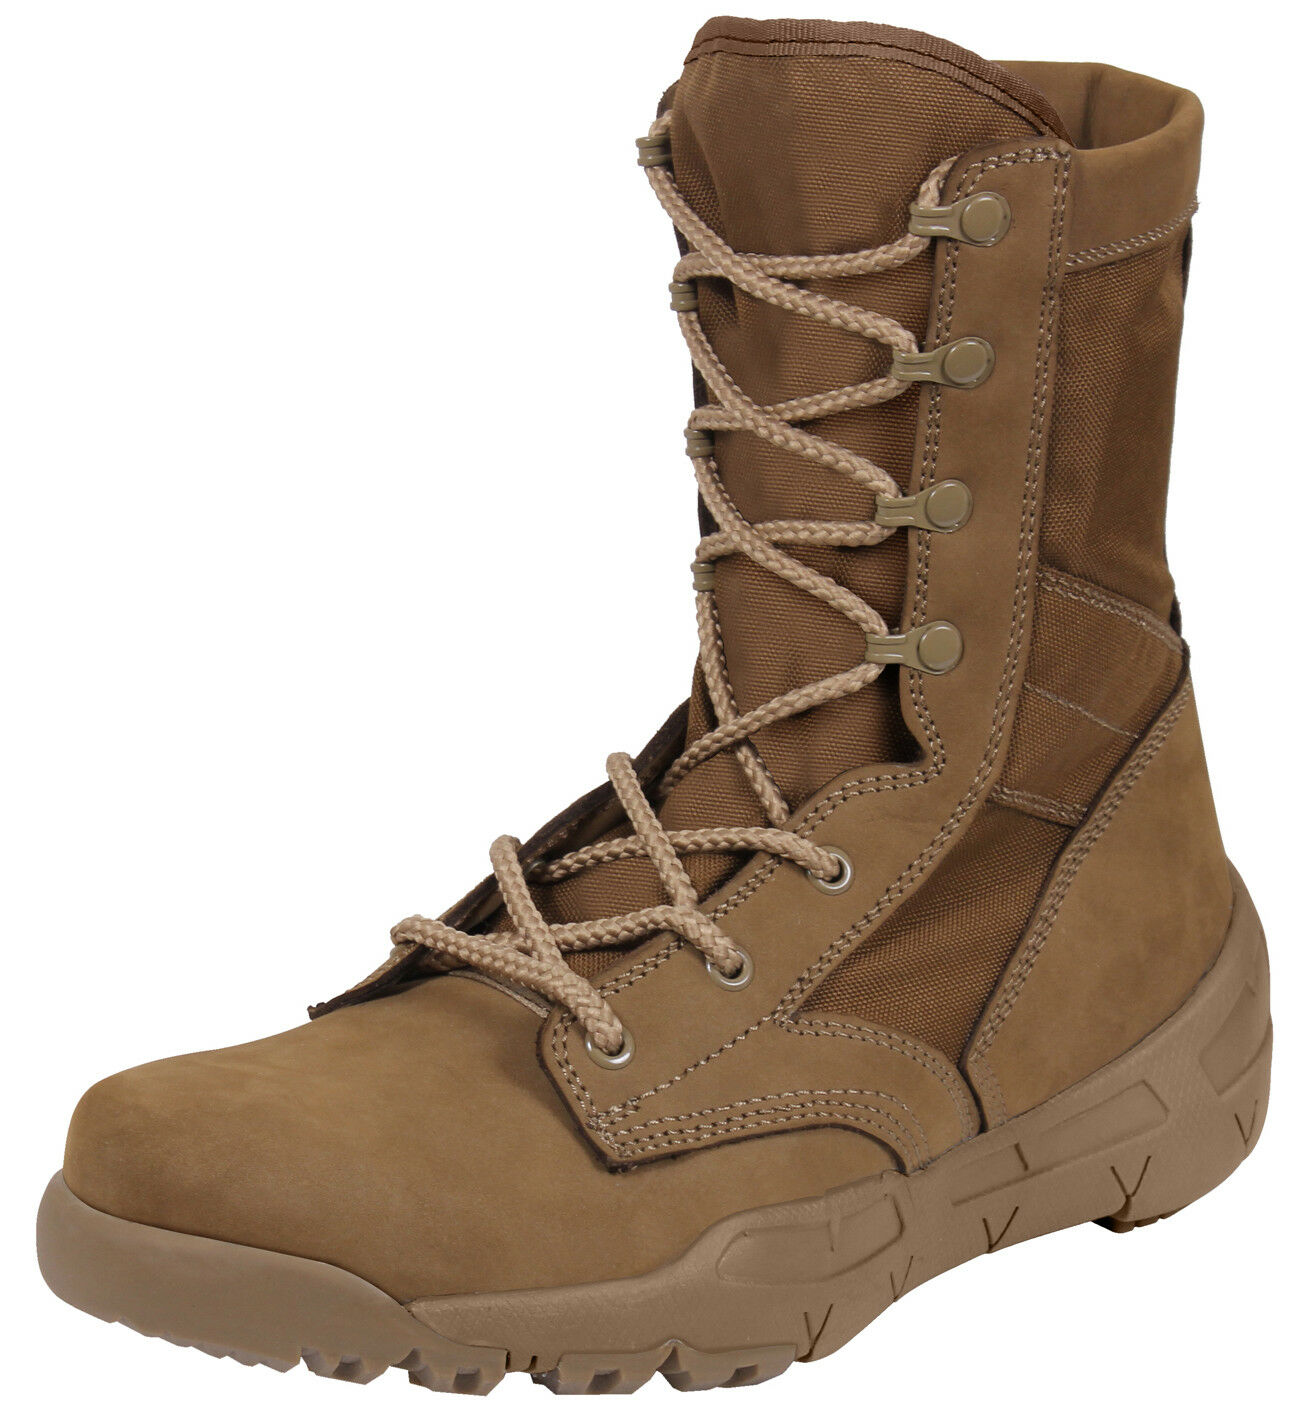 Rothco Waterproof V-Max Lightweight Tactical Boots - AR 670-1 Coyote Brown - 8.5 Inch